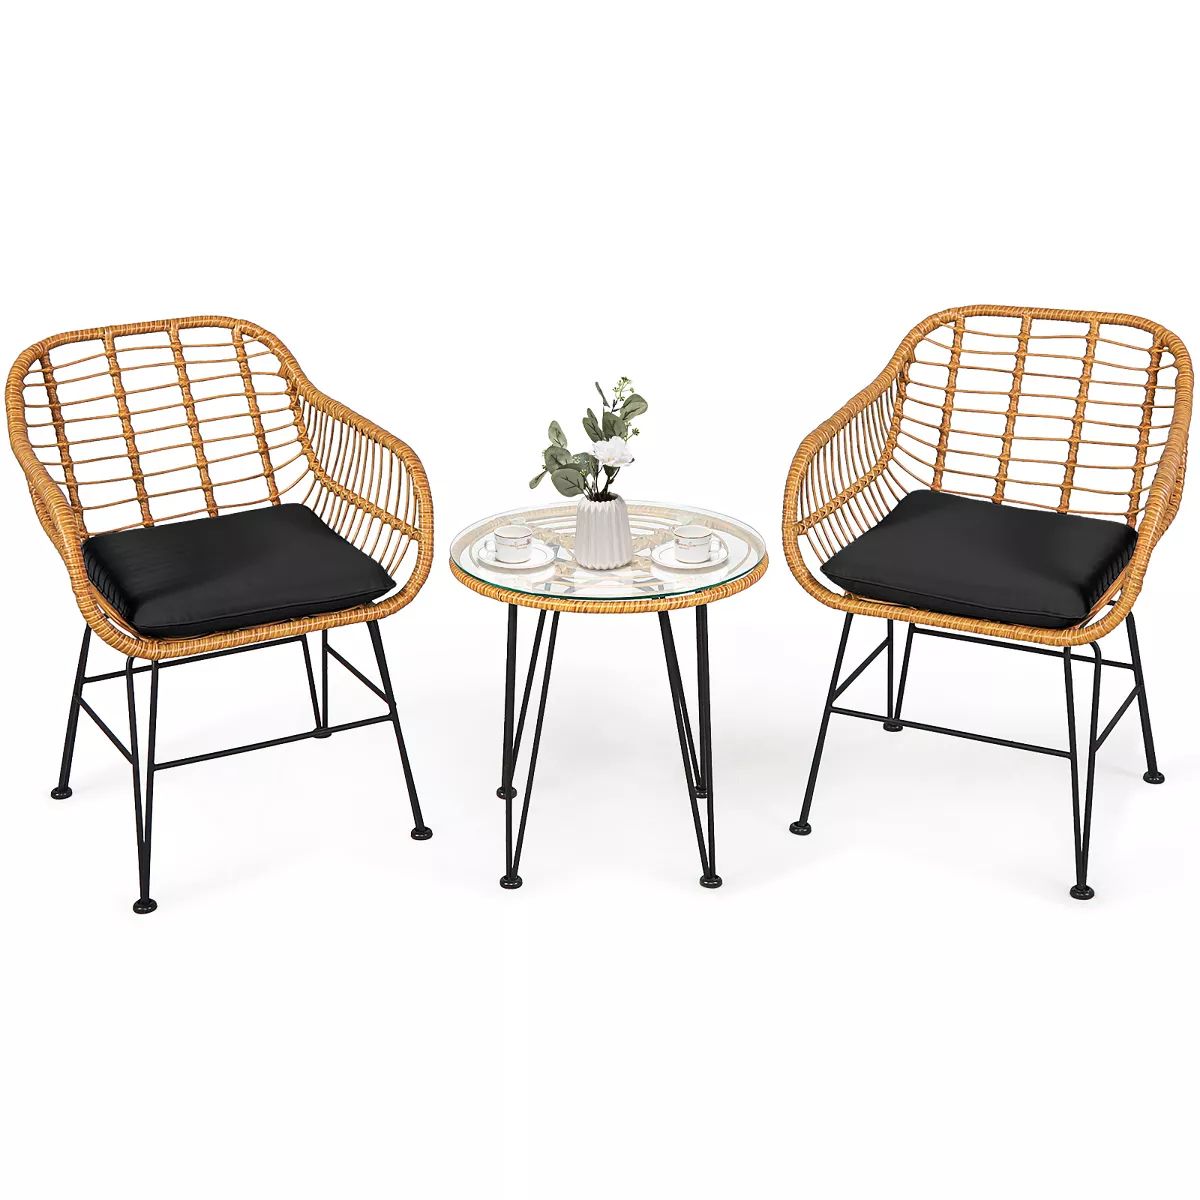 Costway 3PCS Patio Rattan Bistro Furniture Set Cushioned Chair Table Black | Target